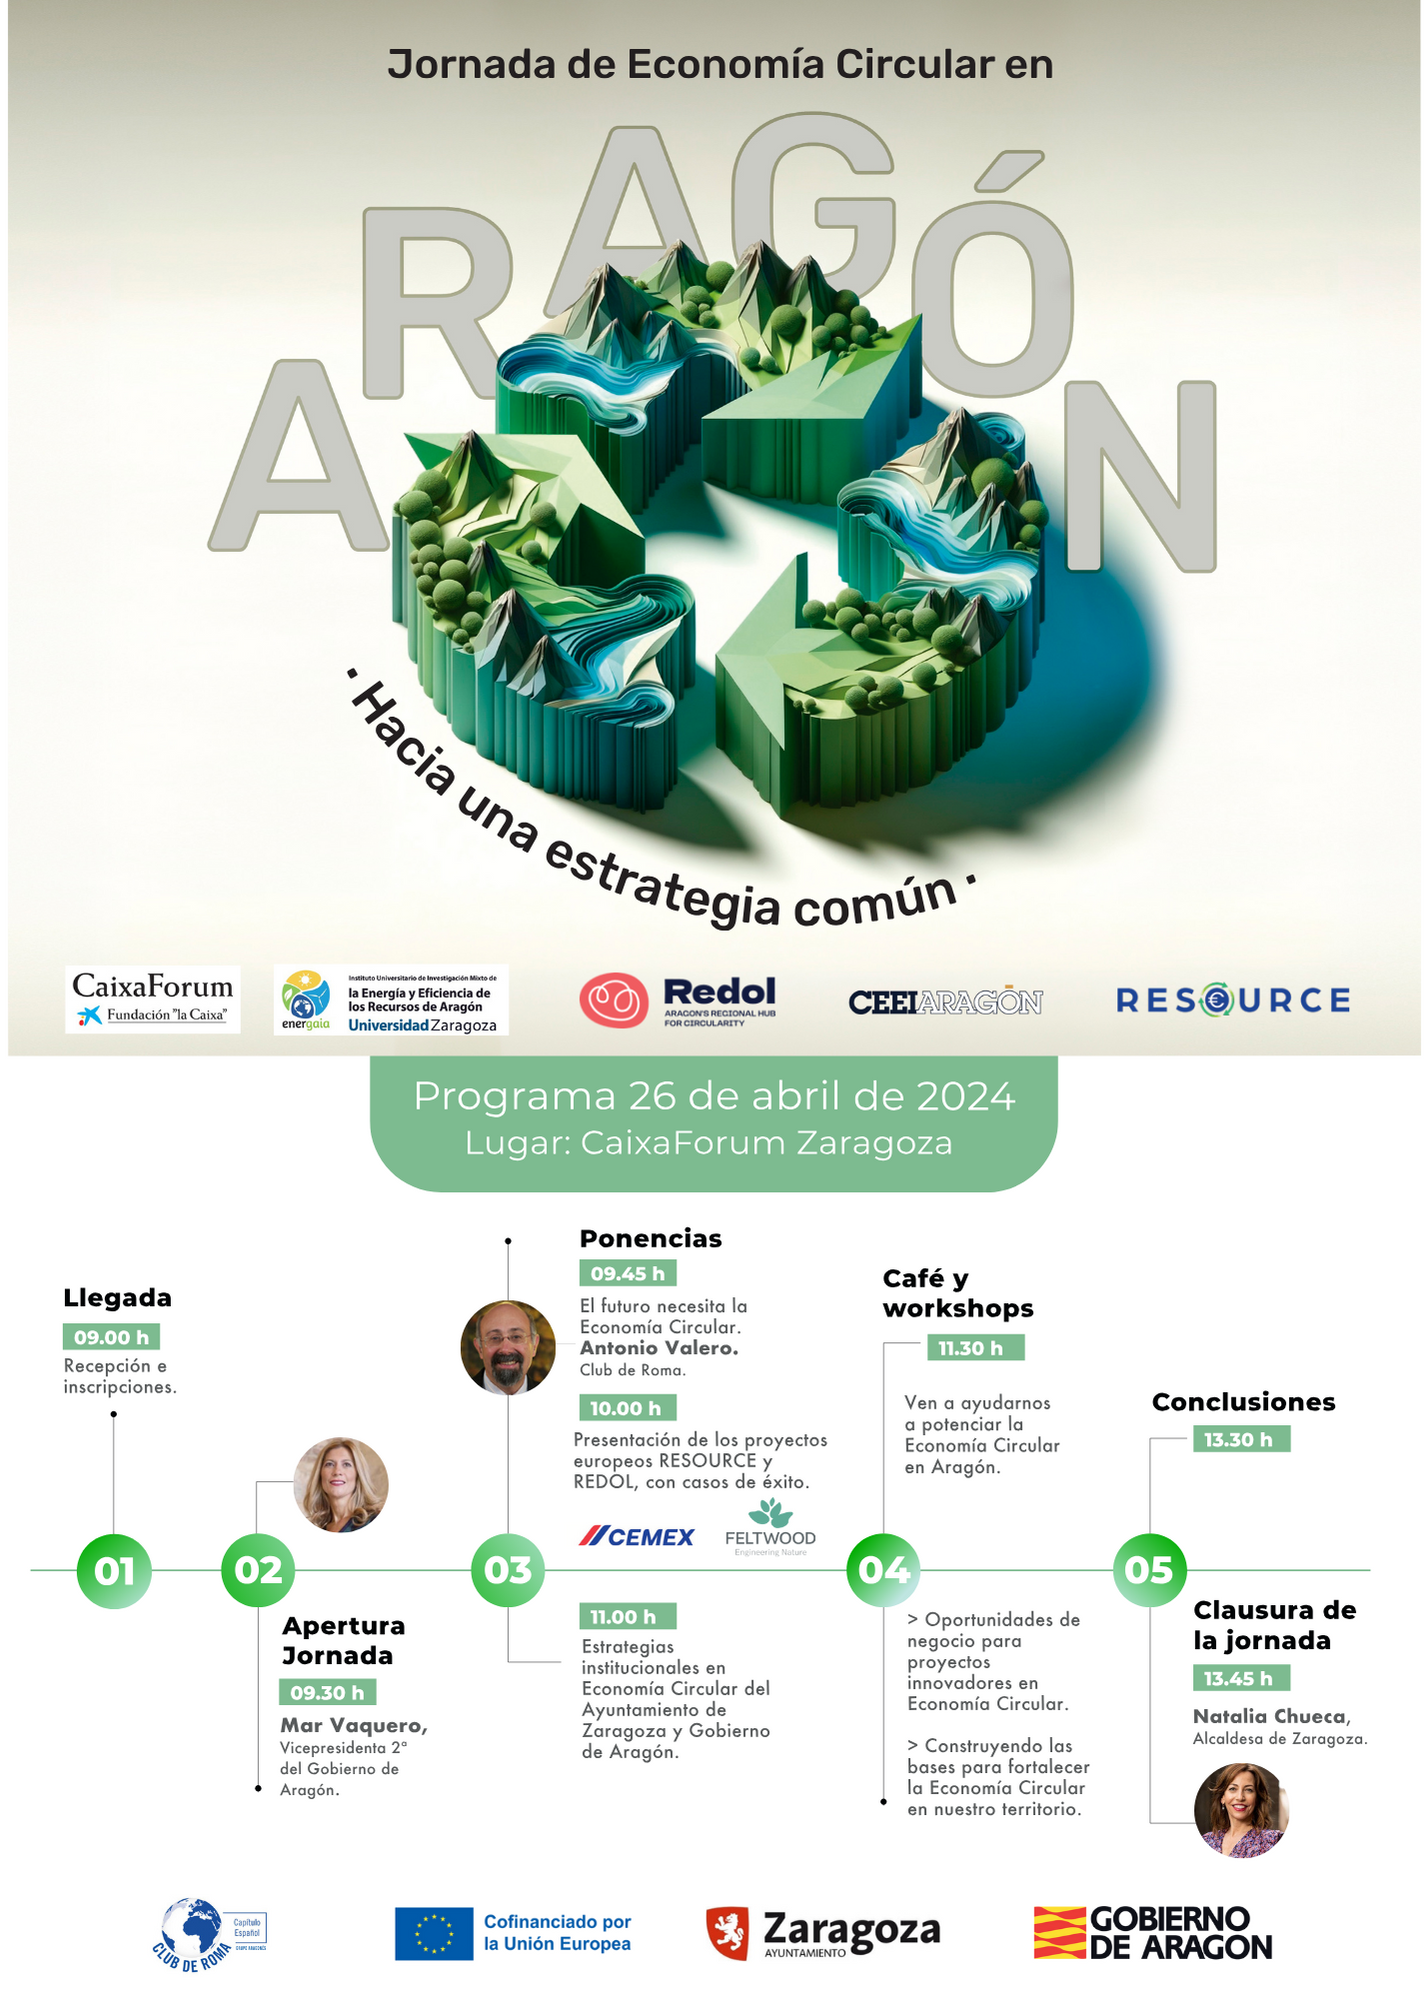 Circular Economy Day in Aragon: “Towards a common strategy”